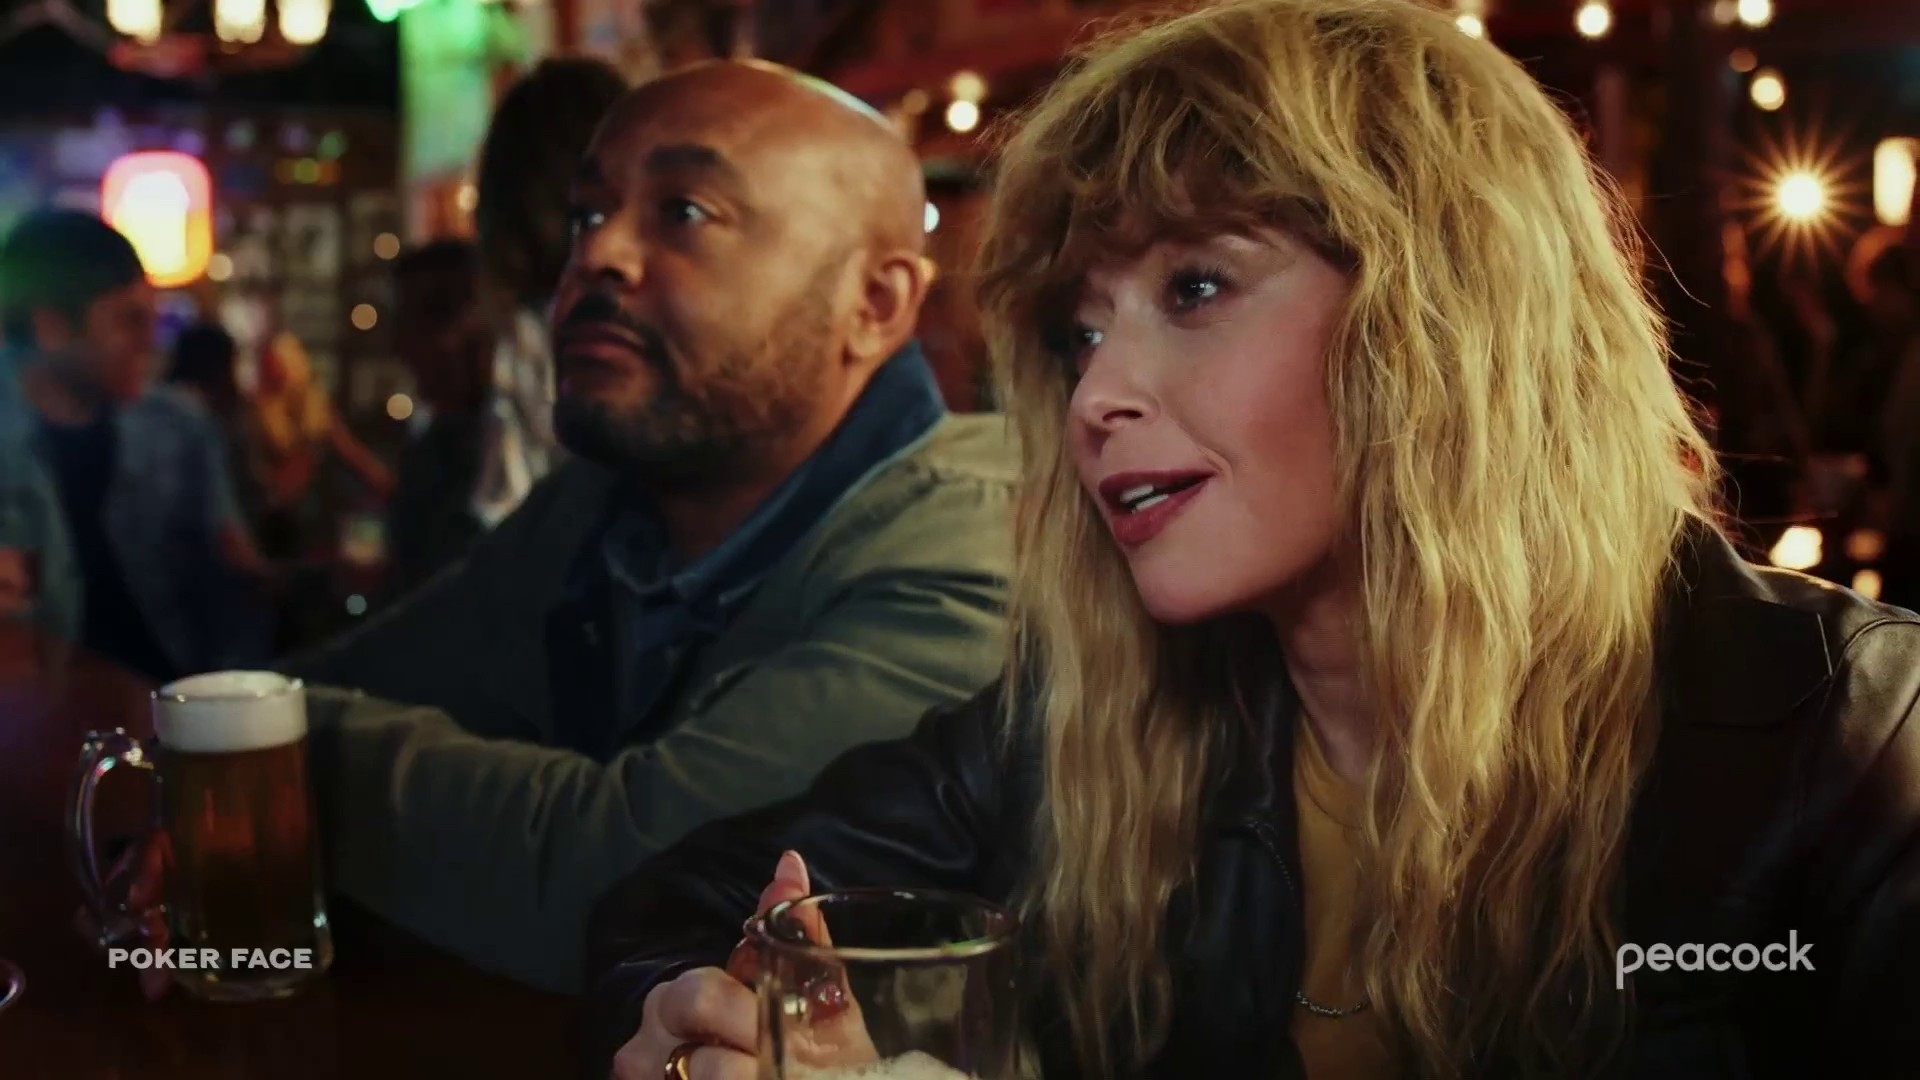 Actress Natasha Lyonne Super Bowl commercial video: Re-watch ad for Peacock  - DraftKings Network